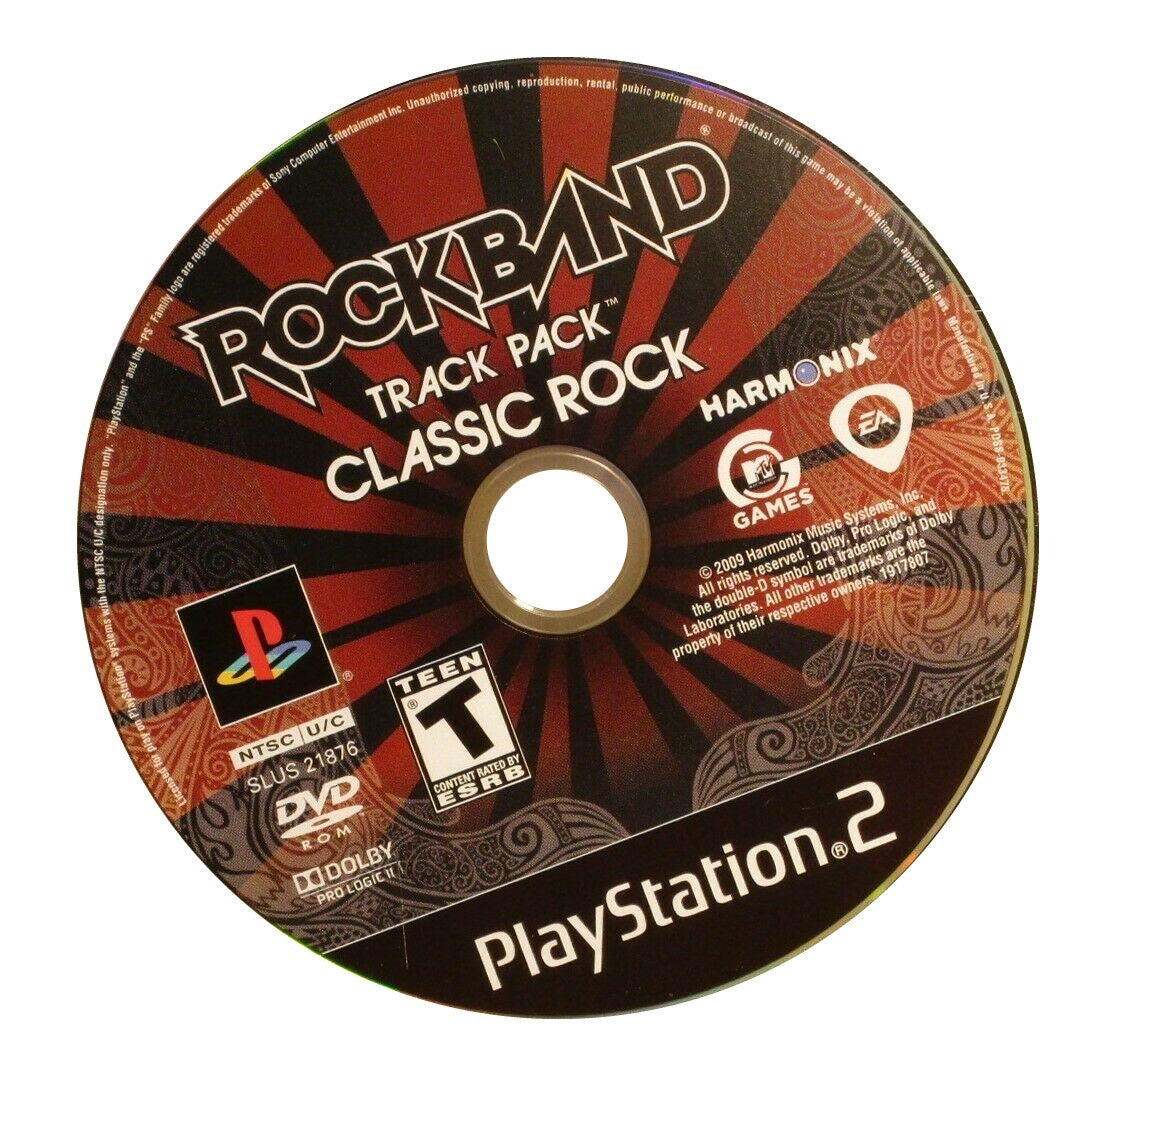 Rock Band Track Pack: Classic Rock - PlayStation 2 (PS2) Game